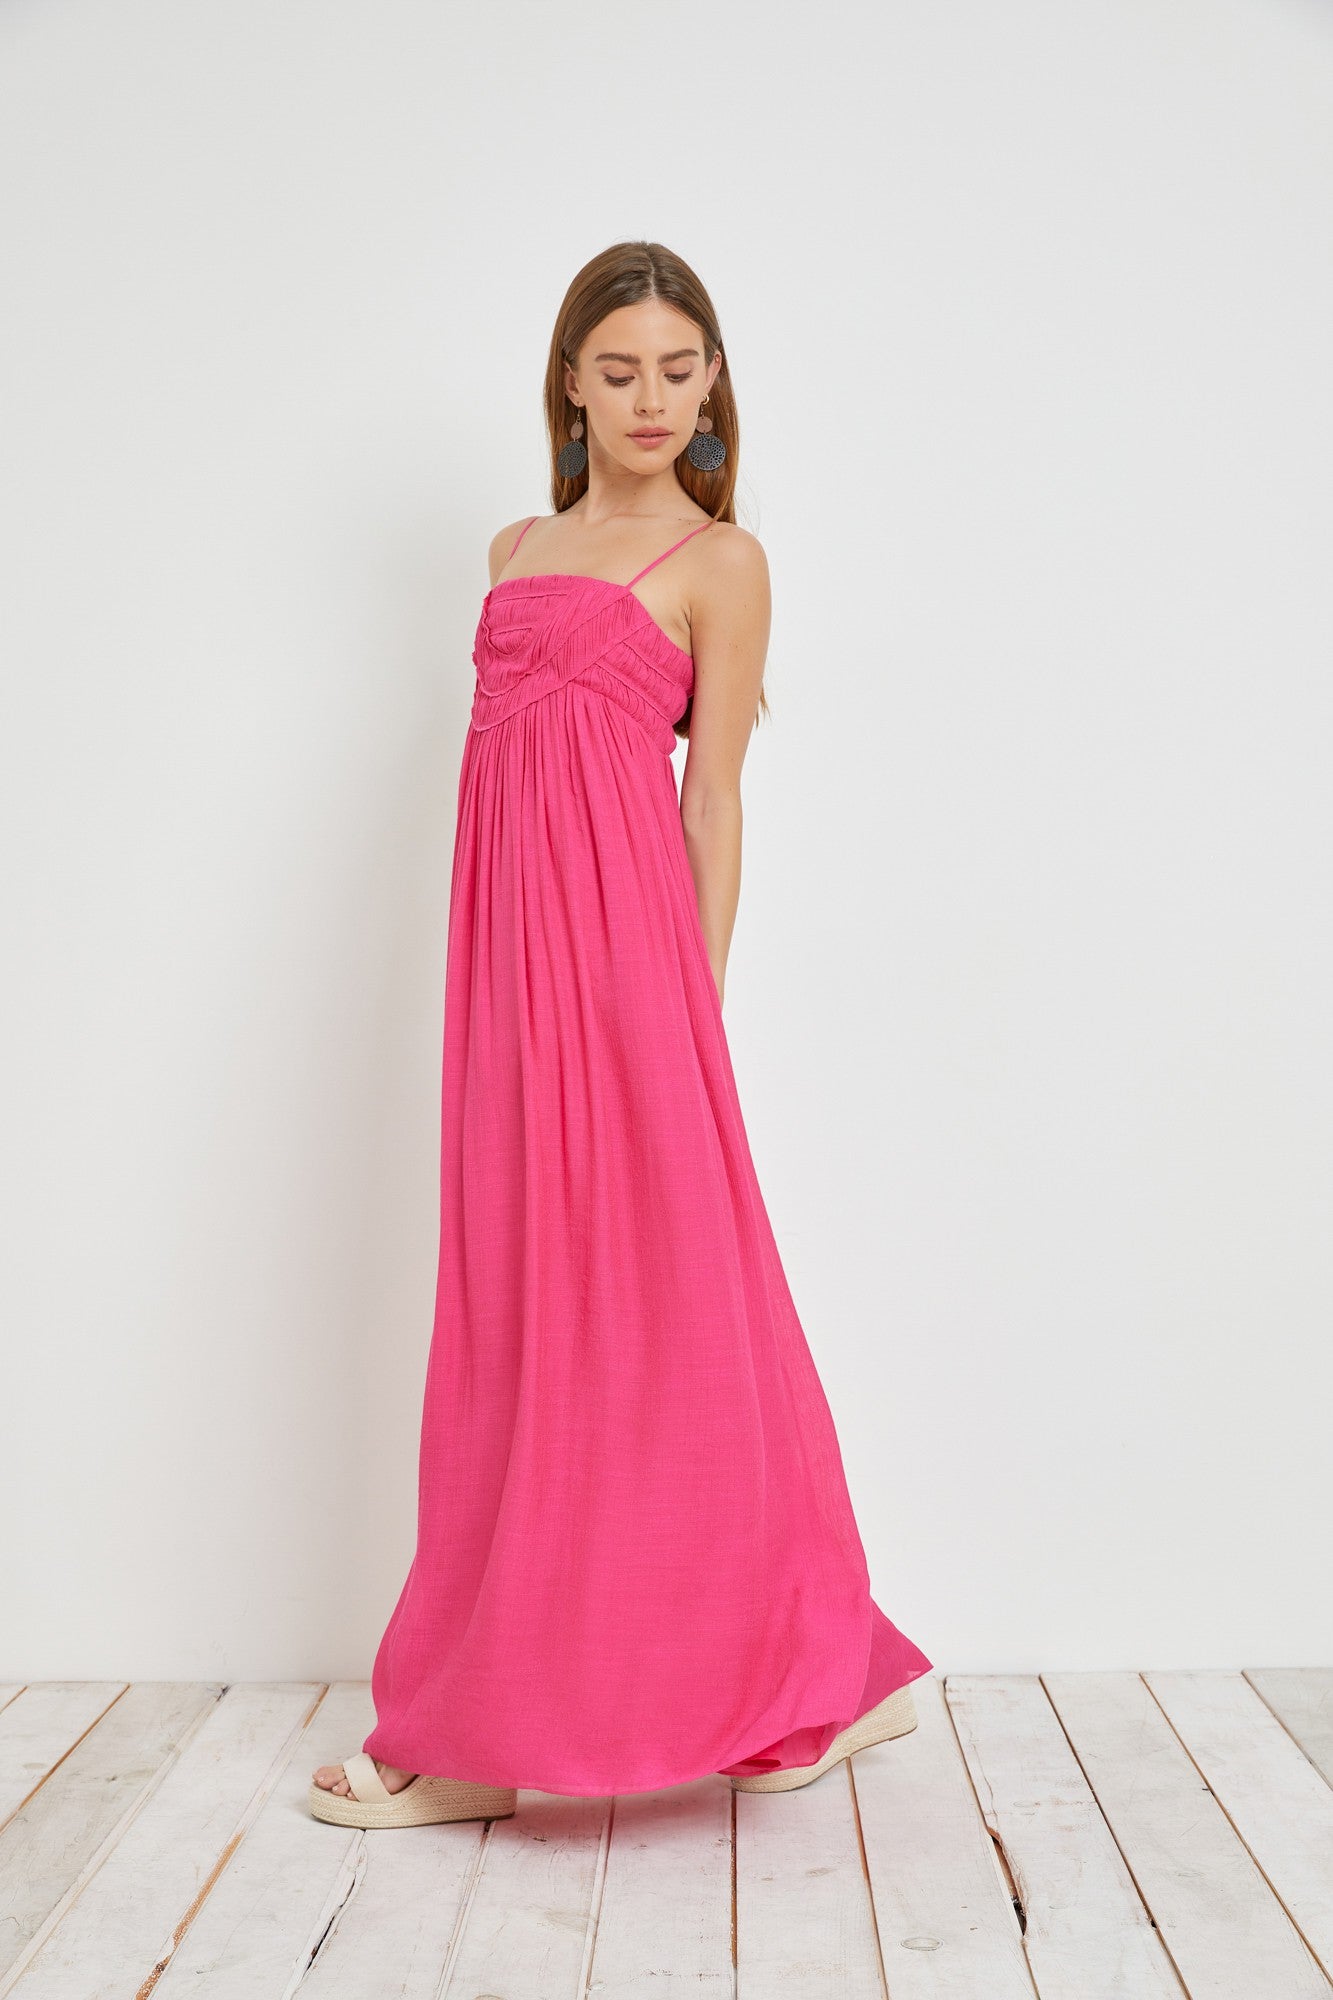 Signs Of Spring Maxi Dress